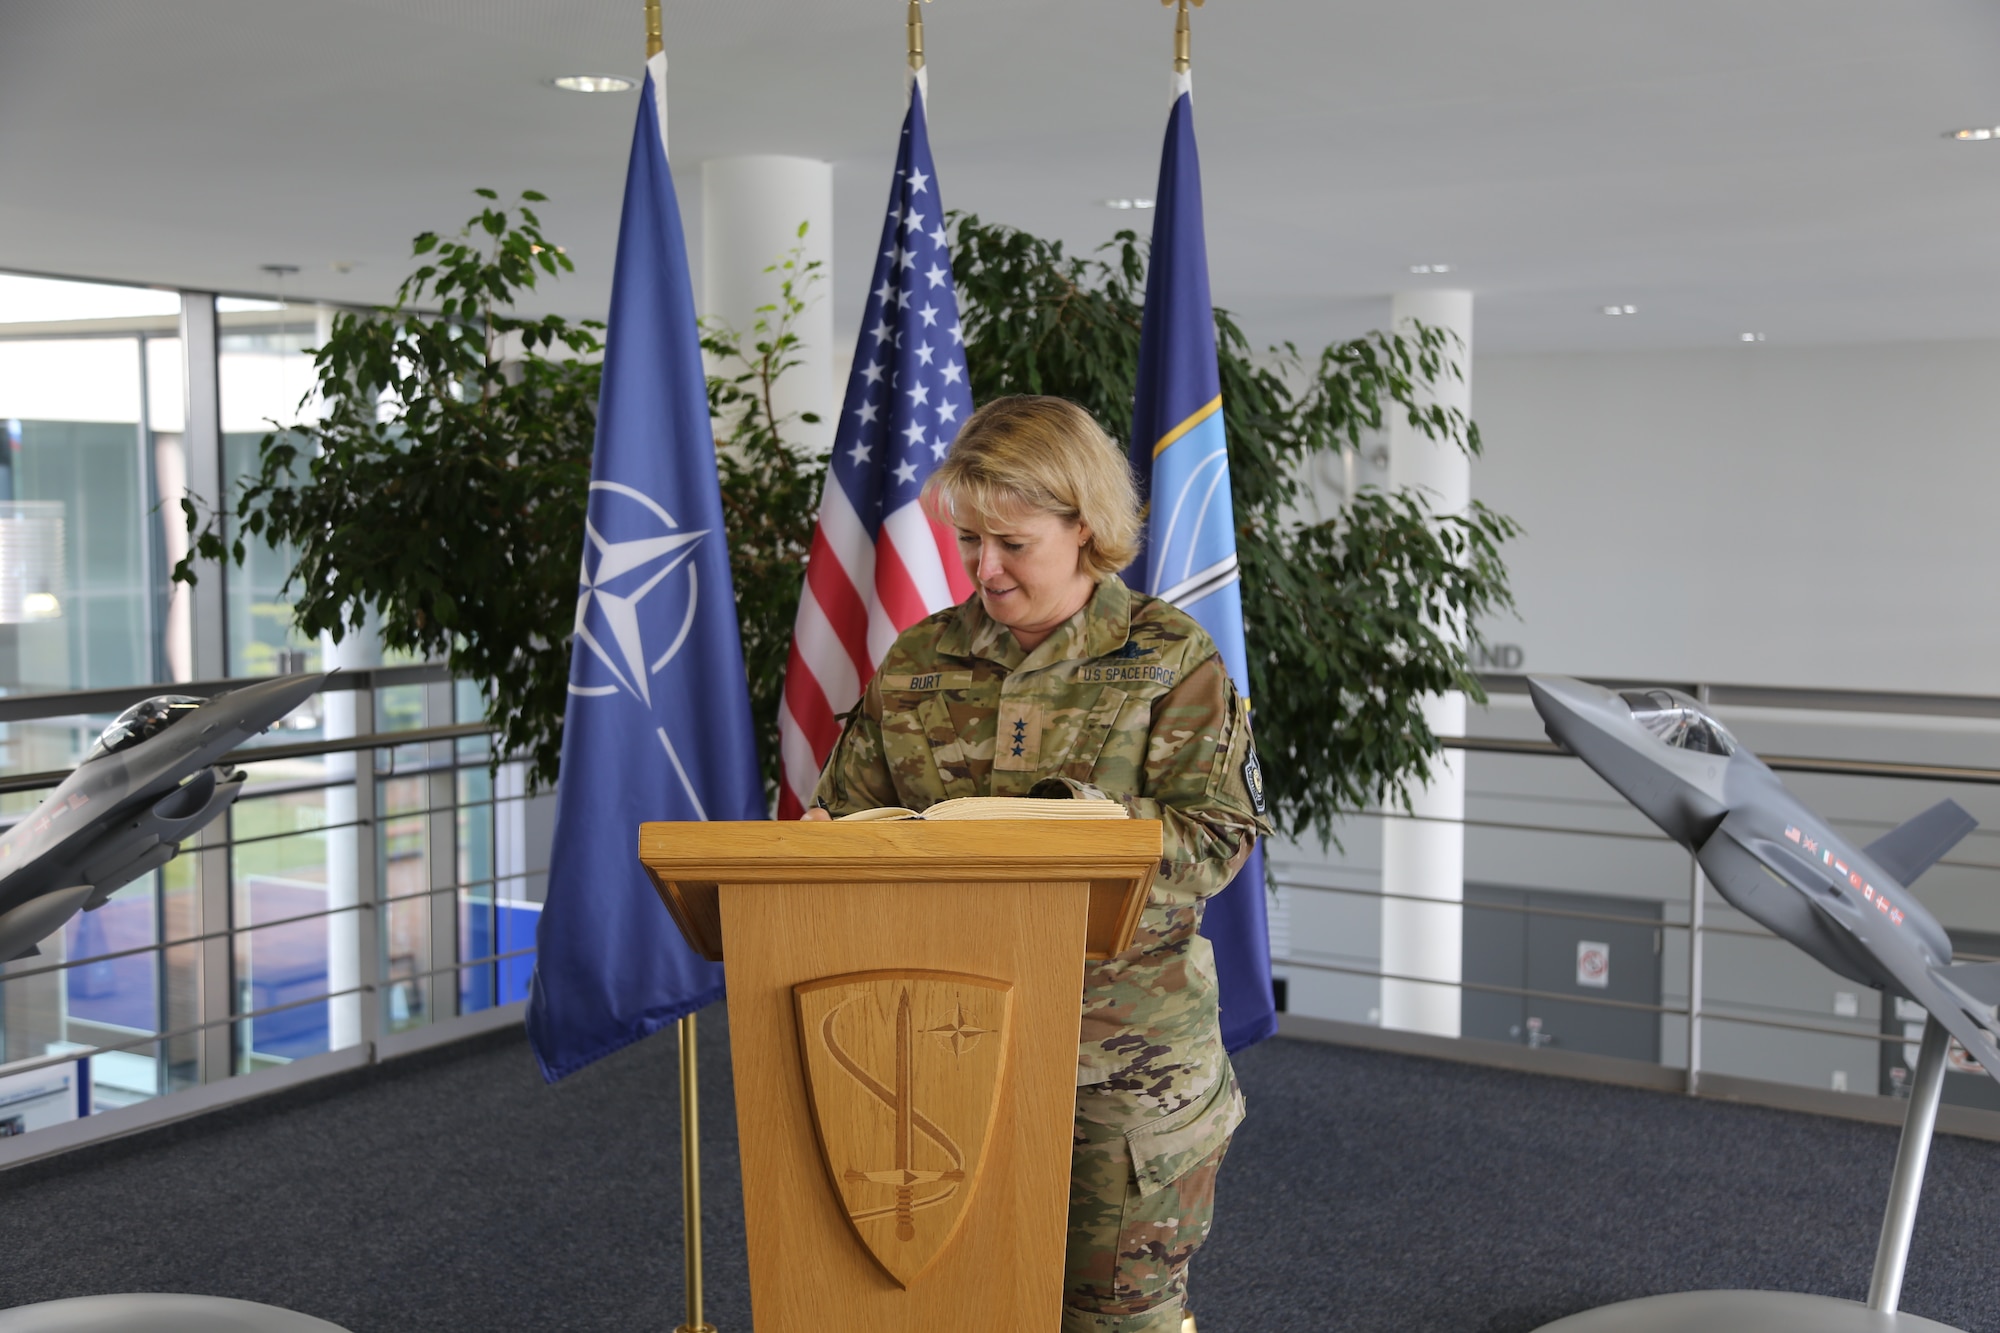 Lt Gen. DeAnna Burt, Chief Operations Officer for the United States Space Force, signs guest book at NATO Allied Air Command at Ramstein Air Base, Germany, May 22, 2023.
Burt visited the NATO Space Center within NATO Allied Air Command to learn and understand how the U.S. can best integrate and support the Alliance’s space mission.
In December 2019, NATO Heads of State and Government declared space as the Alliance's "fifth domain" of operations, alongside land, sea, air and cyberspace, which provides new space for information sharing, capability building, and multilateral cooperation alongside our NATO Allies and Partners.